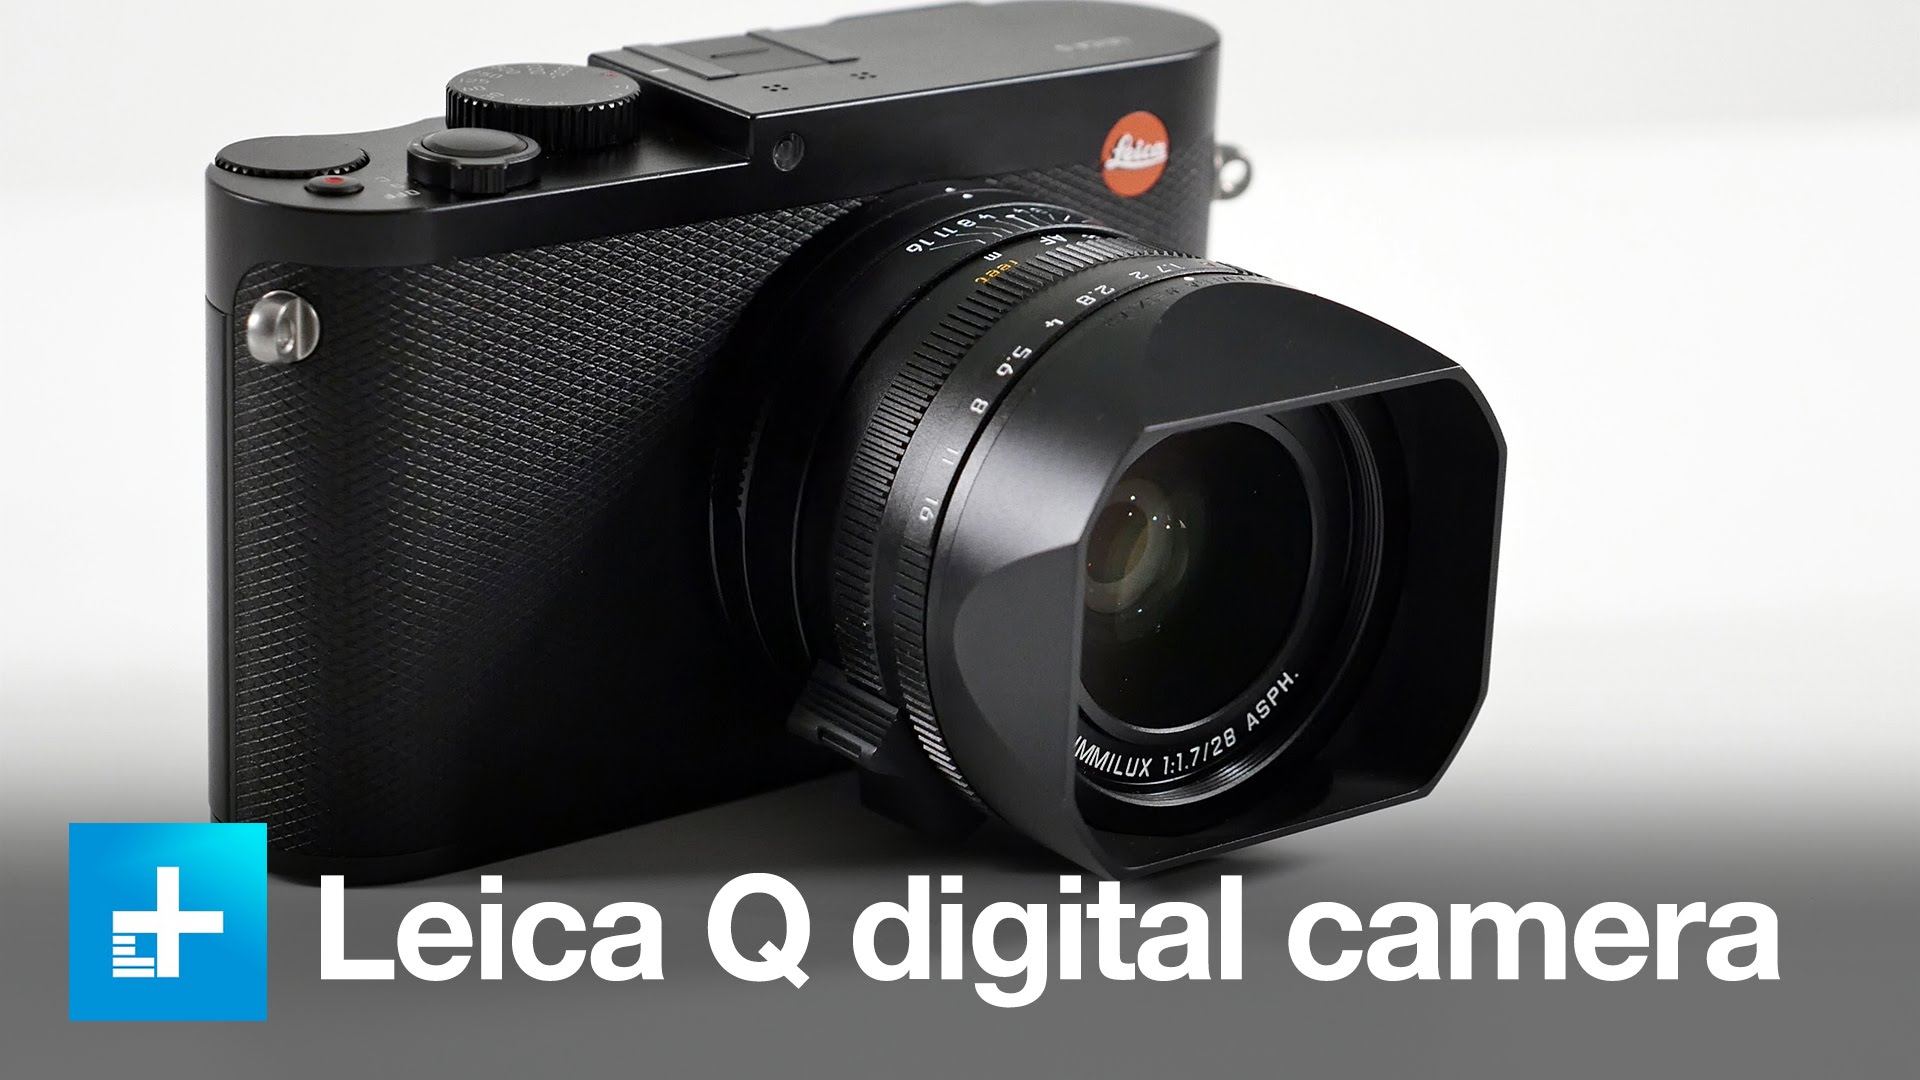 Leica Q 24mp digital camera – Hands on review